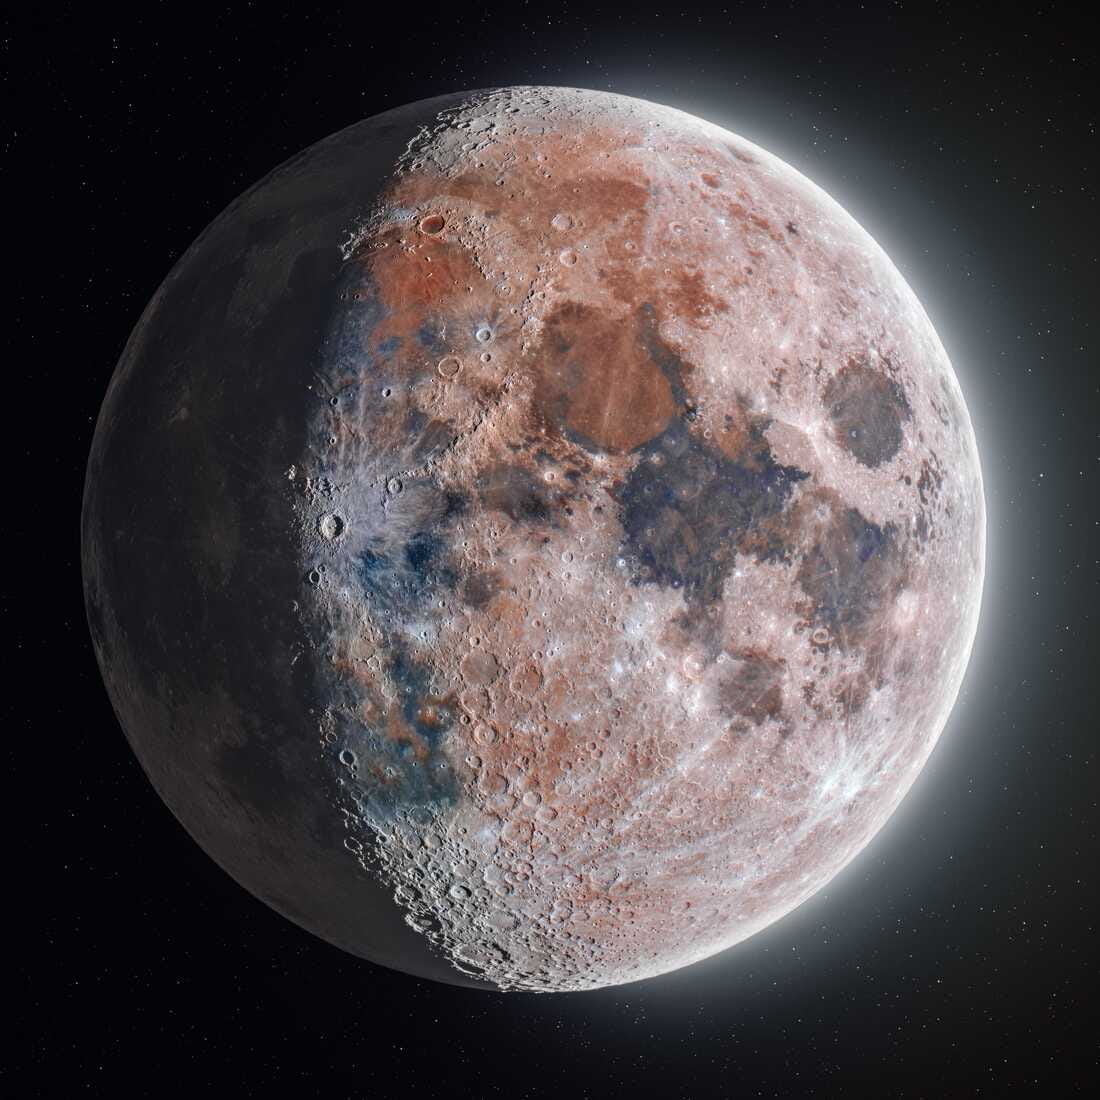 A close-up photo of Earth's moon, showcasing her craters and incredible variations in color, from peachy red tones to dark blue bruises, pinkish pale light and grey blemishes. The moon is in the waning gibbous phase.